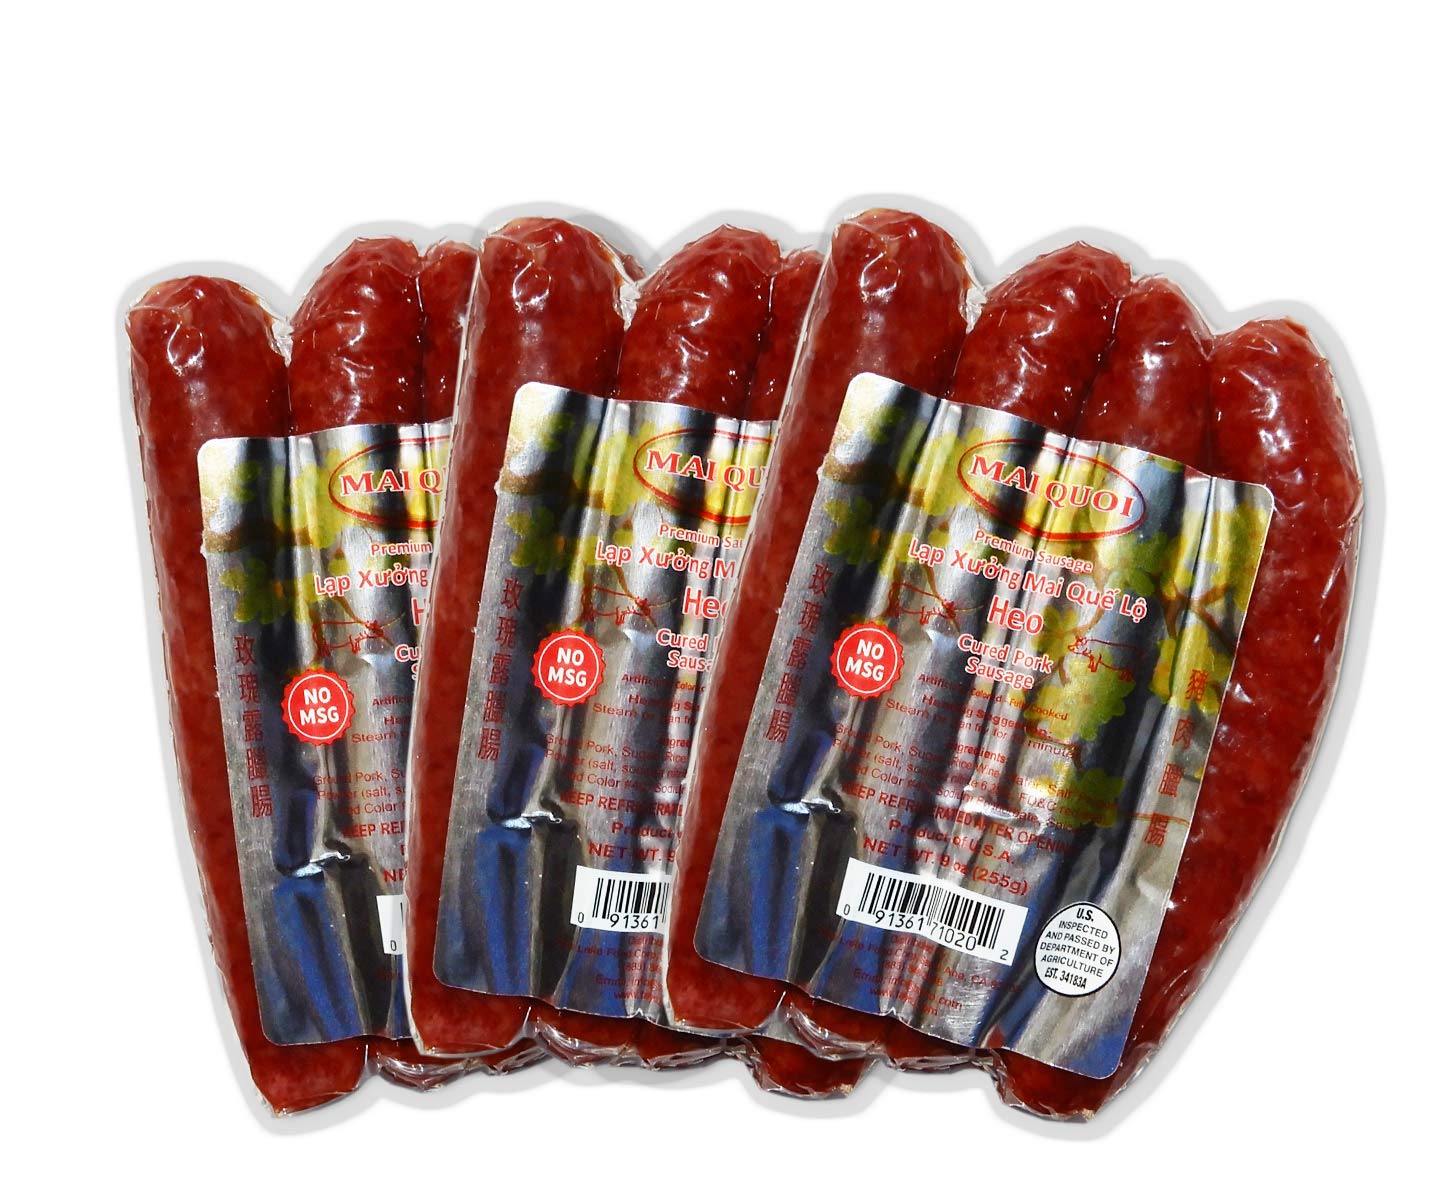 3 Packs of Premium Pork Chinese Style Sausage (Lap Xuong Mai Quoi Pork) (No MSG) – Made In USA